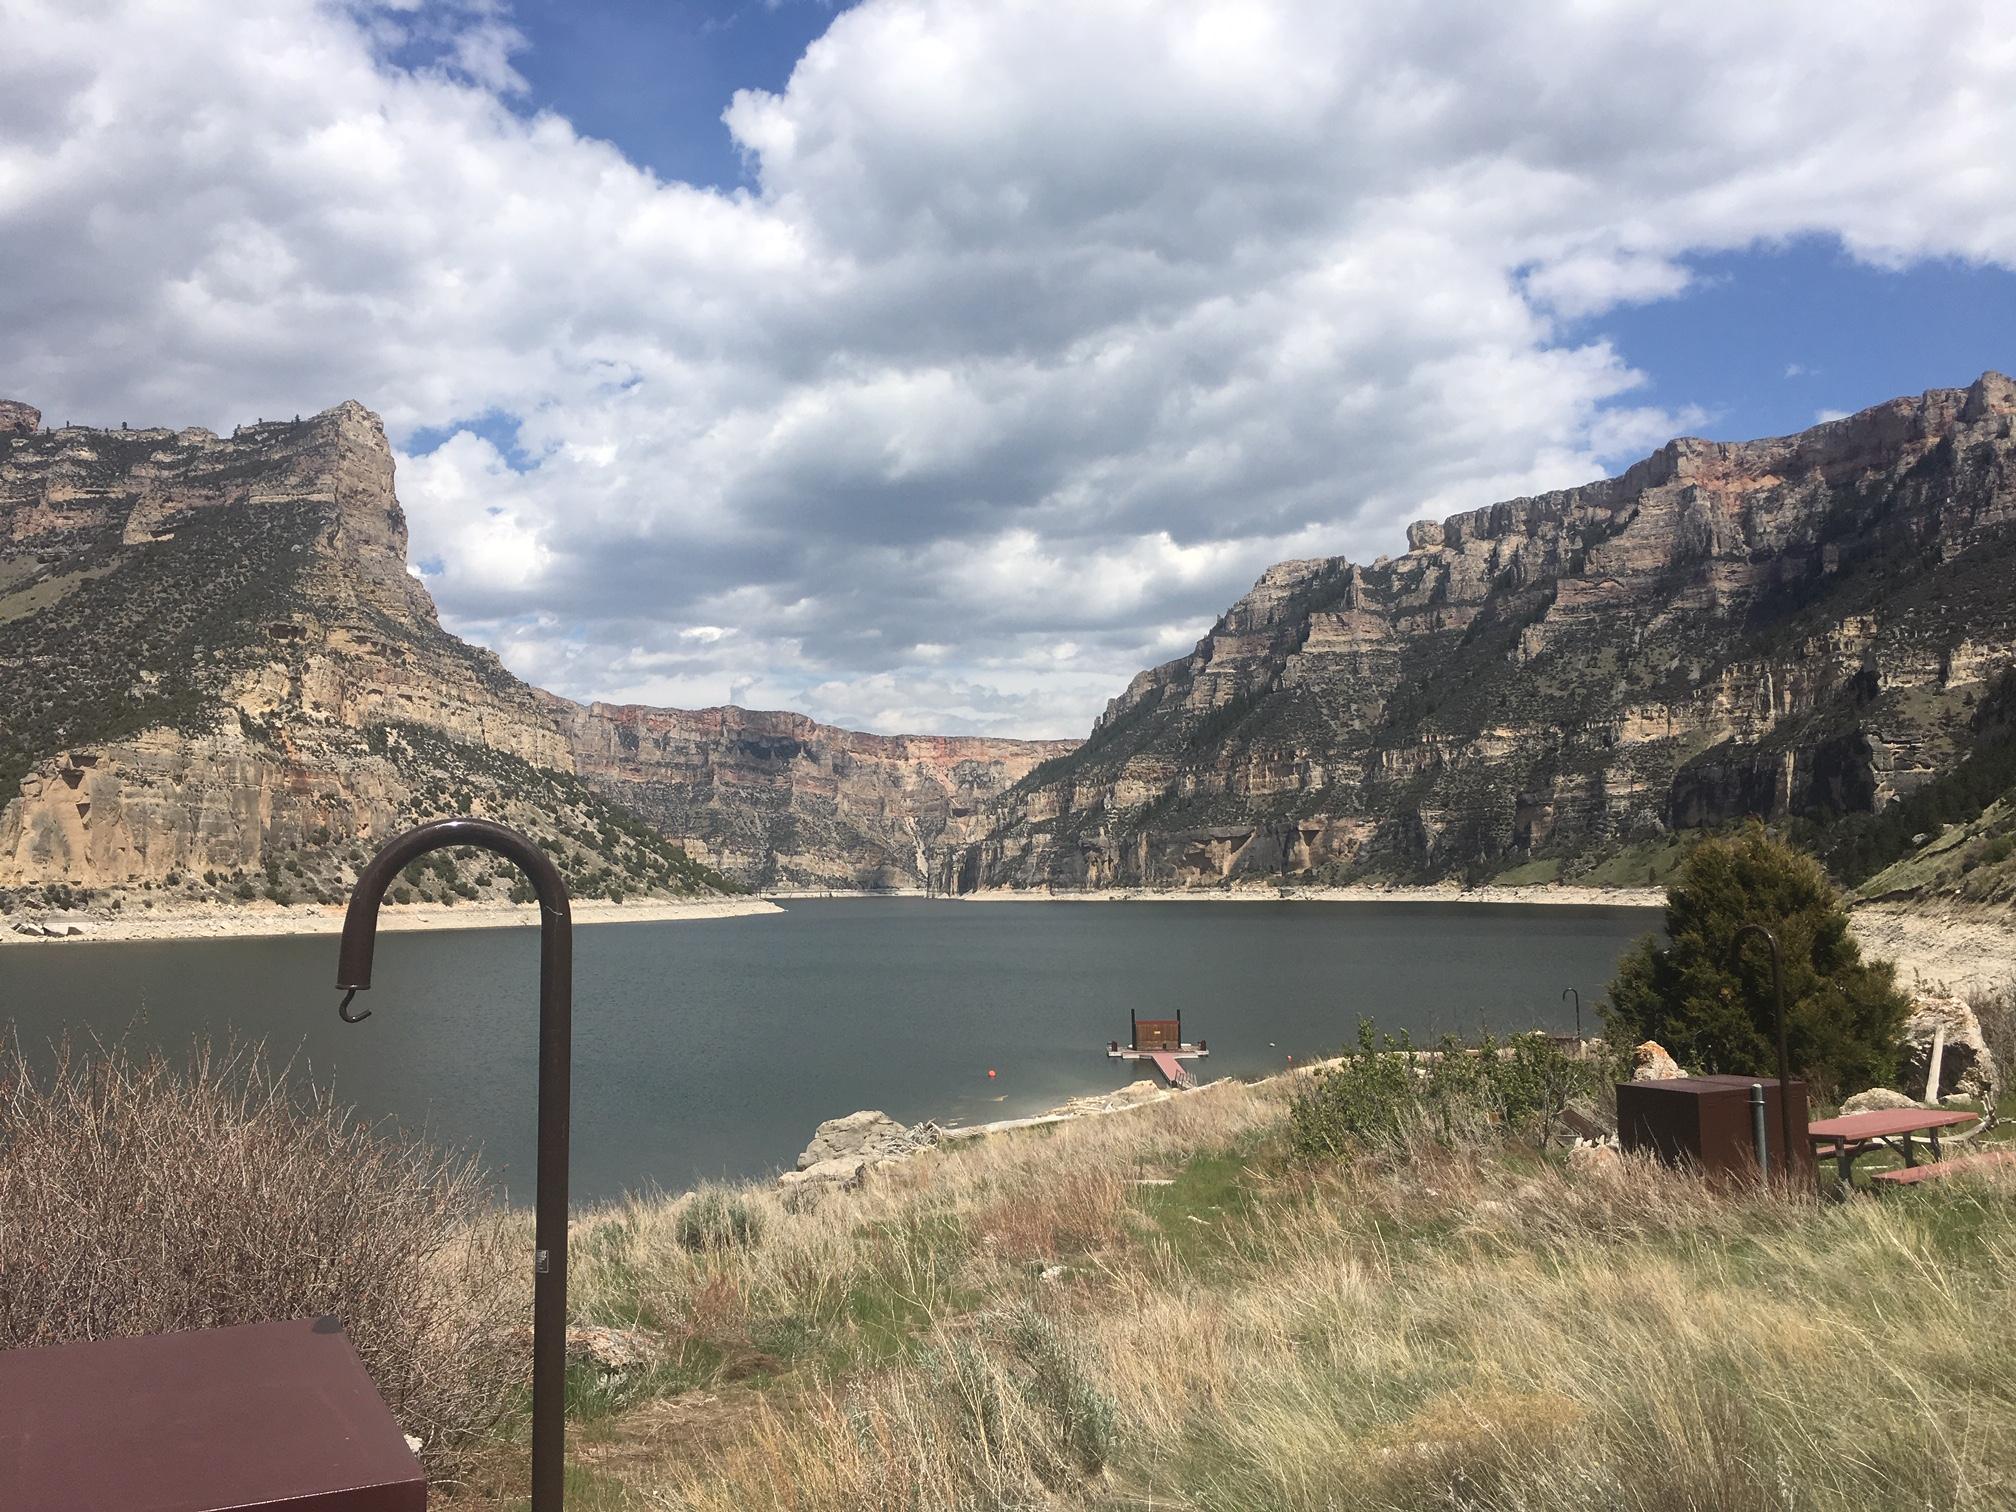 A primitive campground in the foreground with lake and canyon walls in the background.